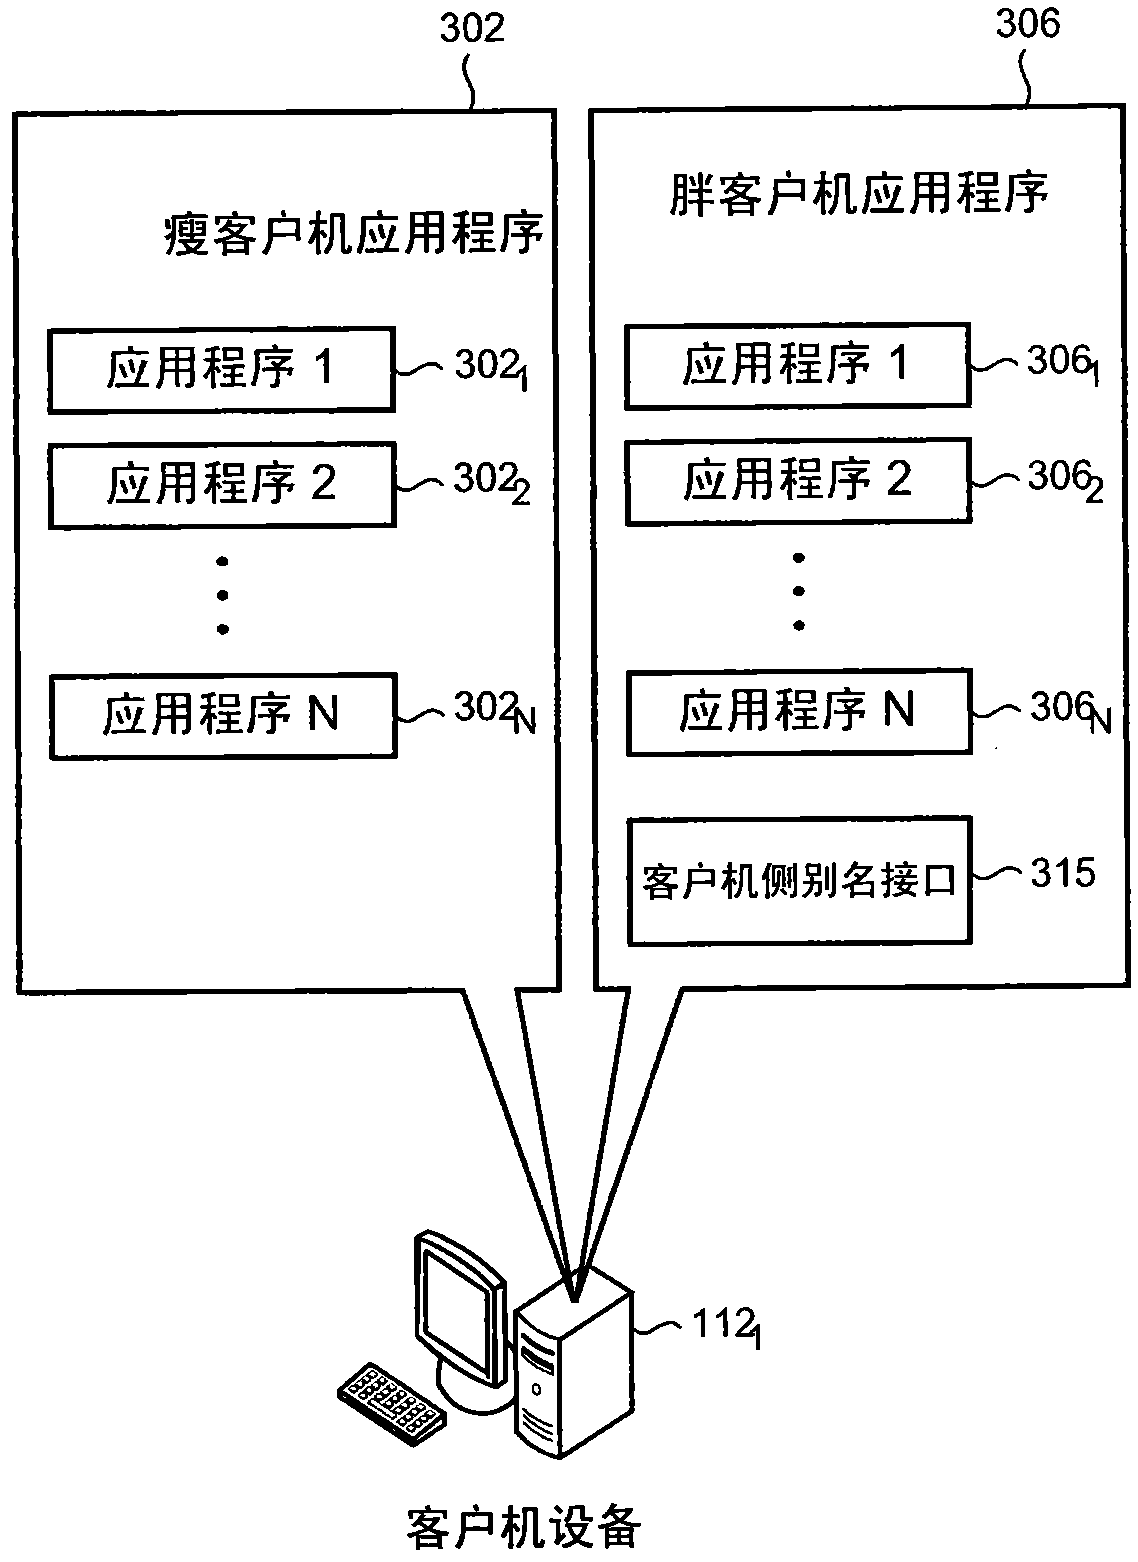 Identity and authentication system using aliases